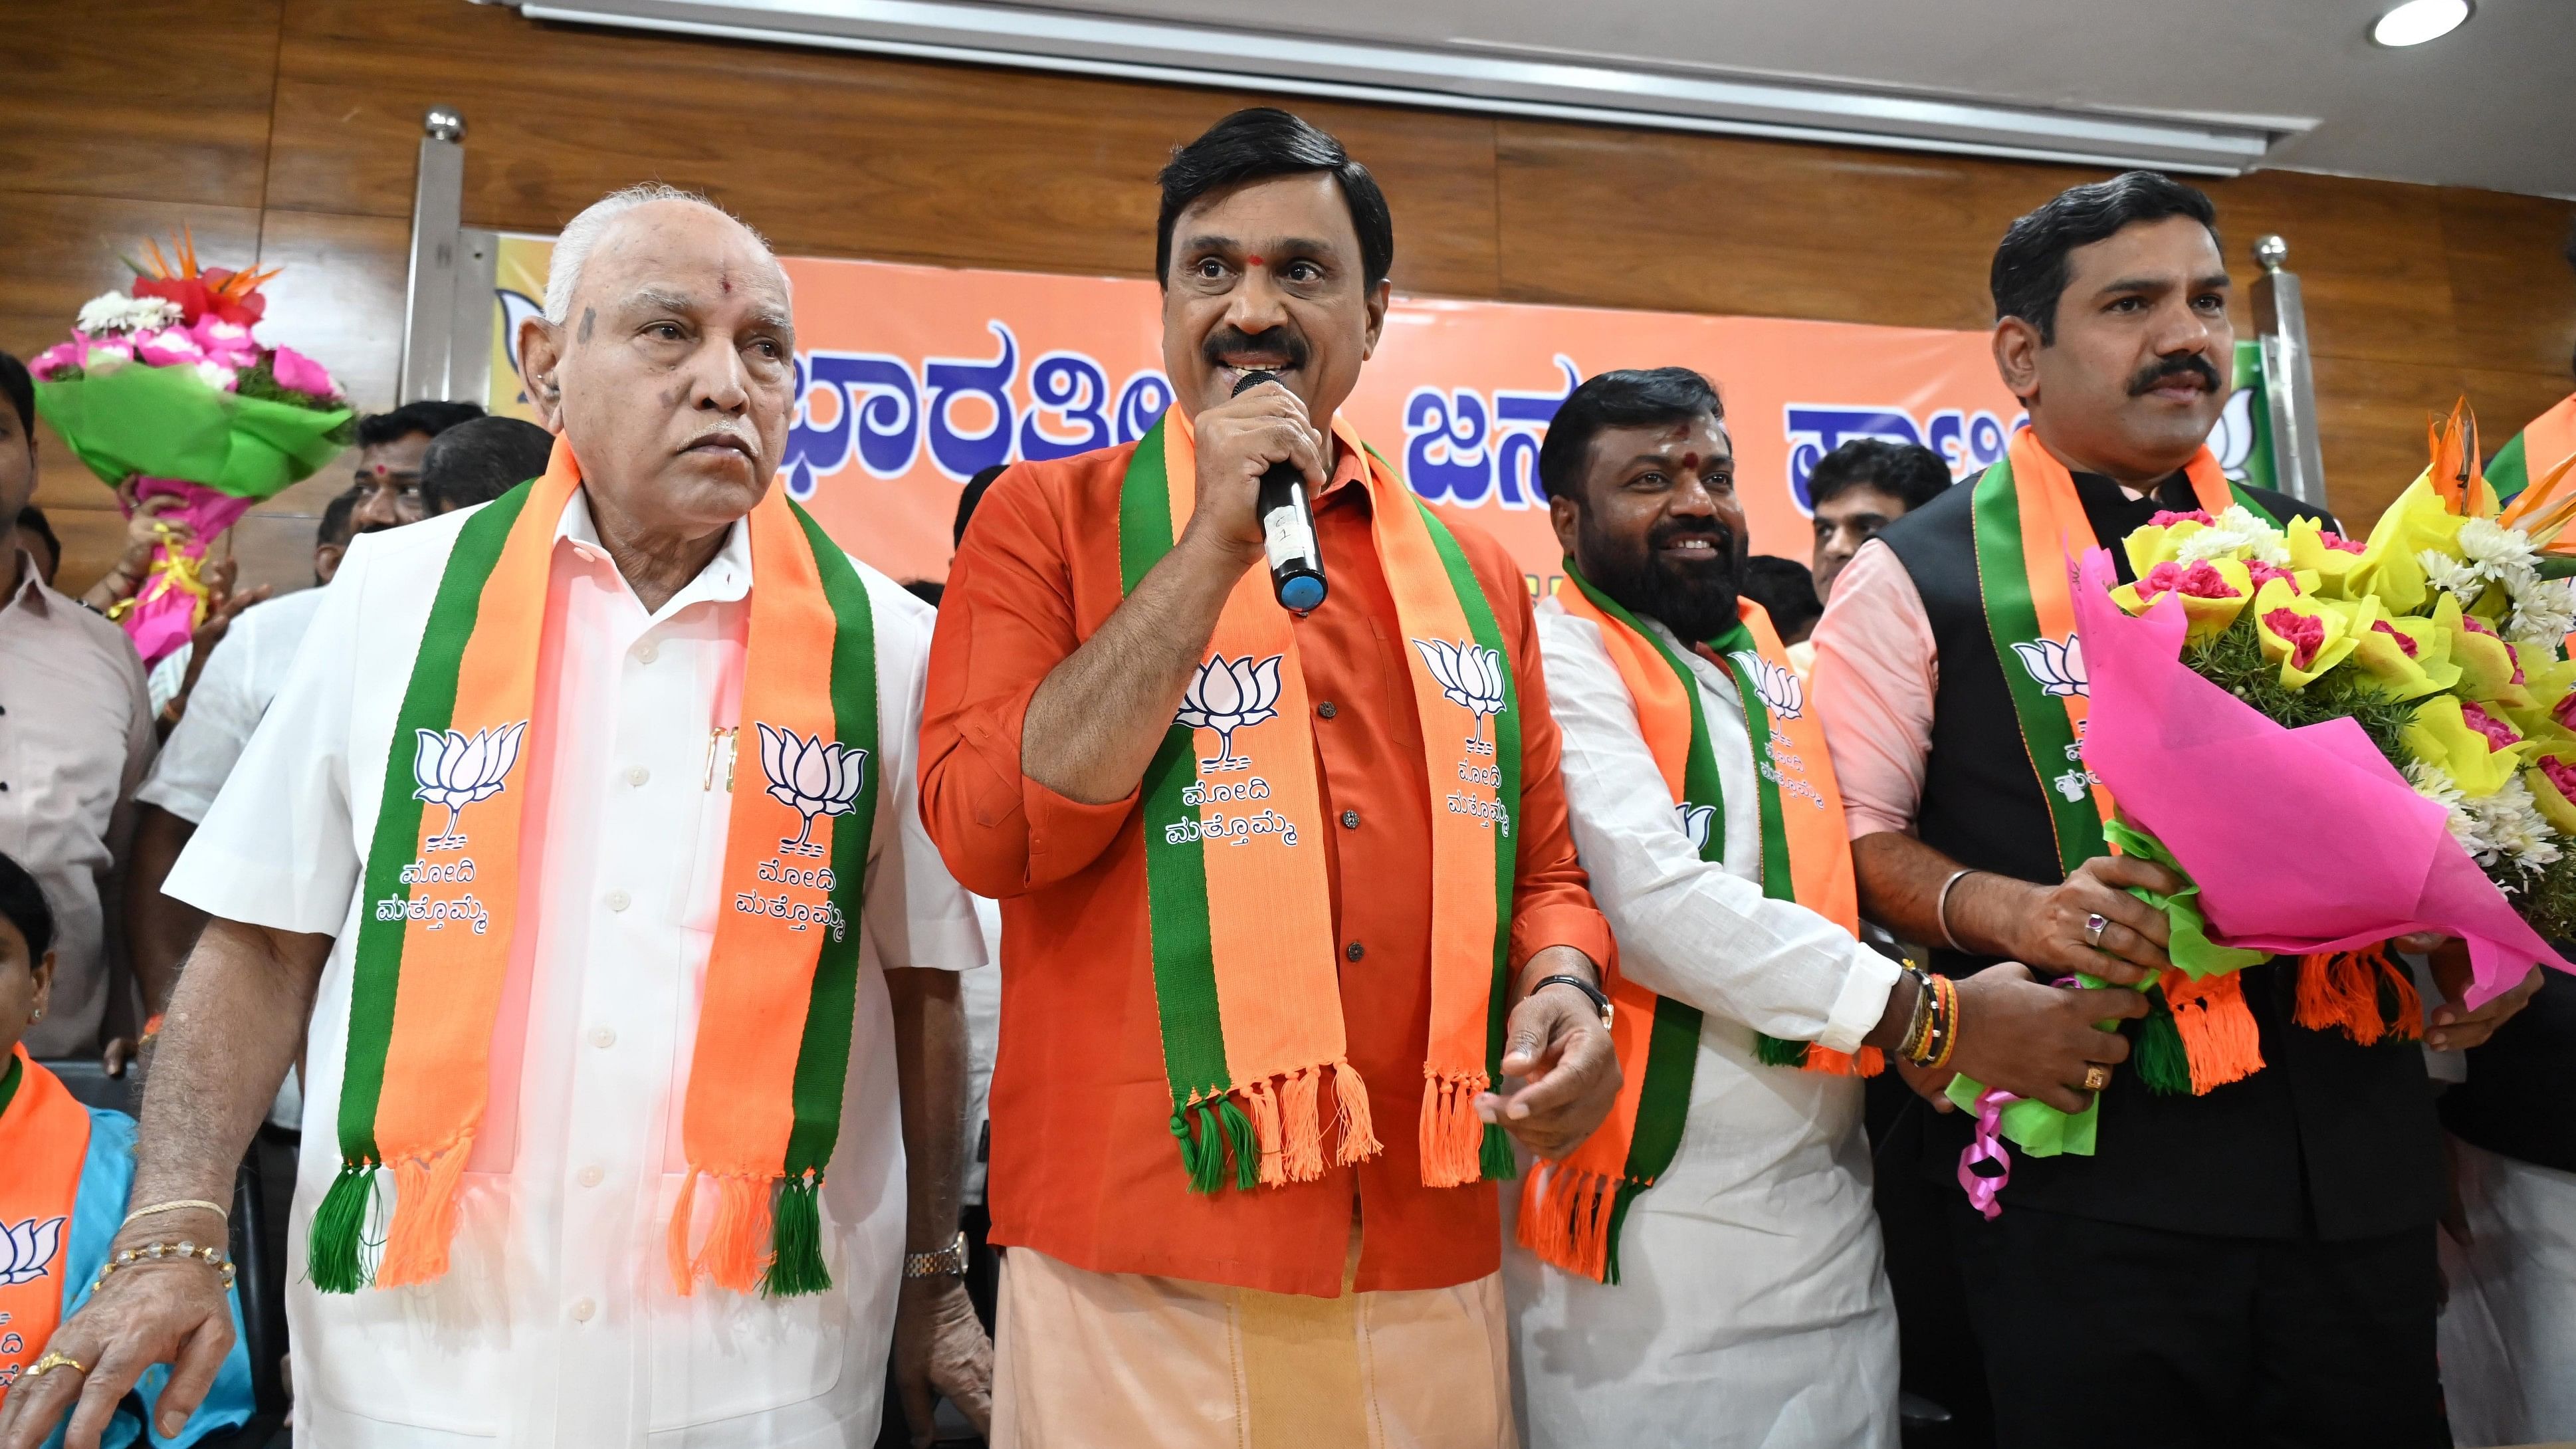 <div class="paragraphs"><p>State BJP president&nbsp;B Y Vijayendra welcomes Gangavati&nbsp;MLA G Janardhana Reddy as he rejoined the party along with his wife Aruna Lakshmi in Bengaluru on Monday. Party veteran B S Yediyurappa and others were present. </p></div>